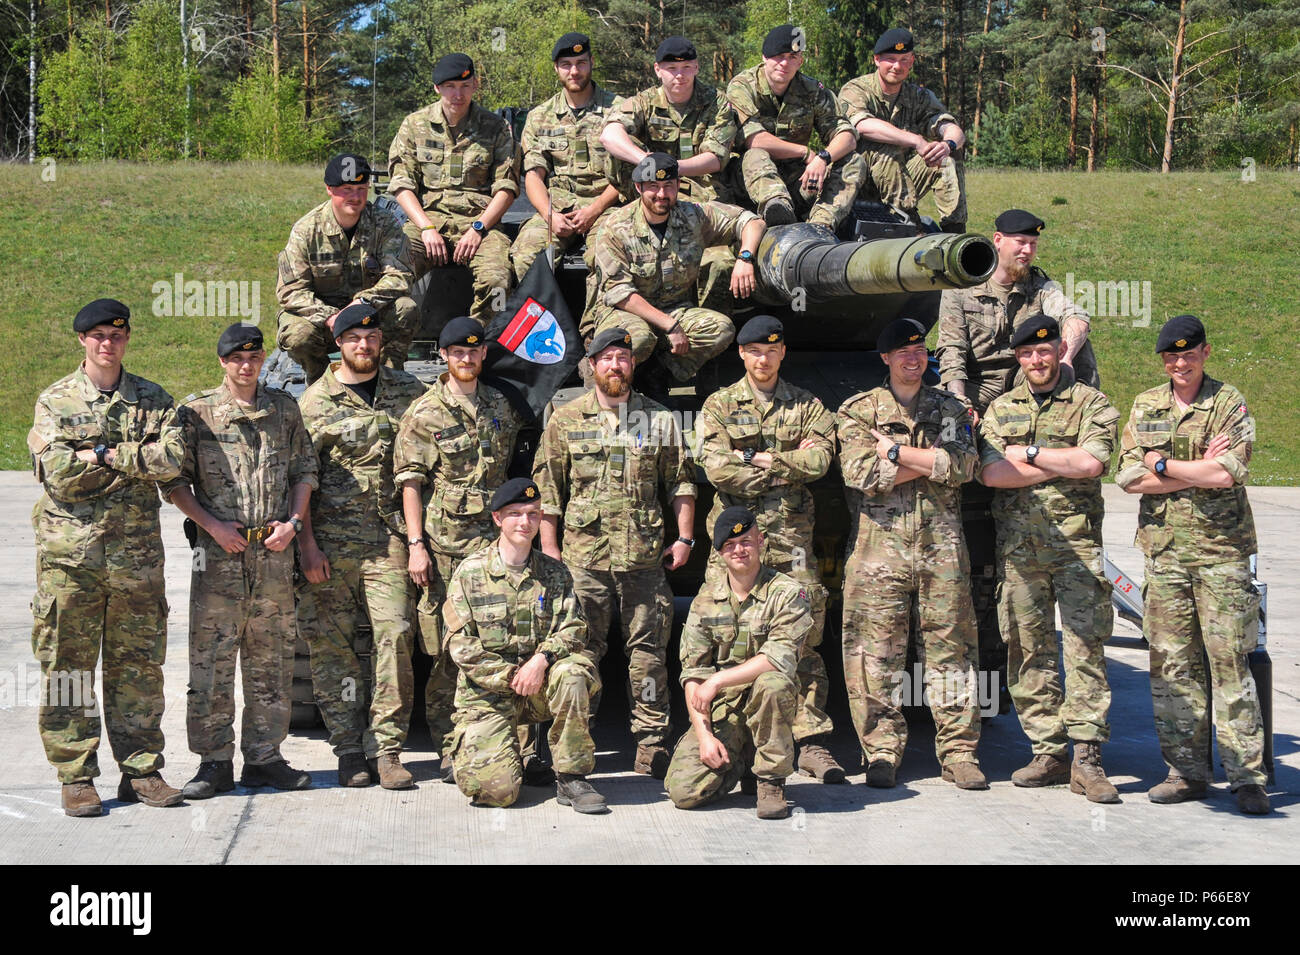 Soldiers from Denmark participating in the Strong Europe Tank Challenge (SETC) pose for a group photo May 08, 2016 at Grafenwoehr Training Area, Germany. The SETC is co-hosted by U.S. Army Europe and the German Bundeswehr May 10-13, 2016. The competition is designed to foster military partnership while promoting NATO interoperability. Seven platoons from six NATO nations are competing in SETC - the first multinational tank challenge at Grafenwoehr in 25 years. For more photos, videos and stories from the Strong Europe Tank Challenge, go to http://www.eur.army.mil/tankchallenge/ (U.S. Army phot Stock Photo